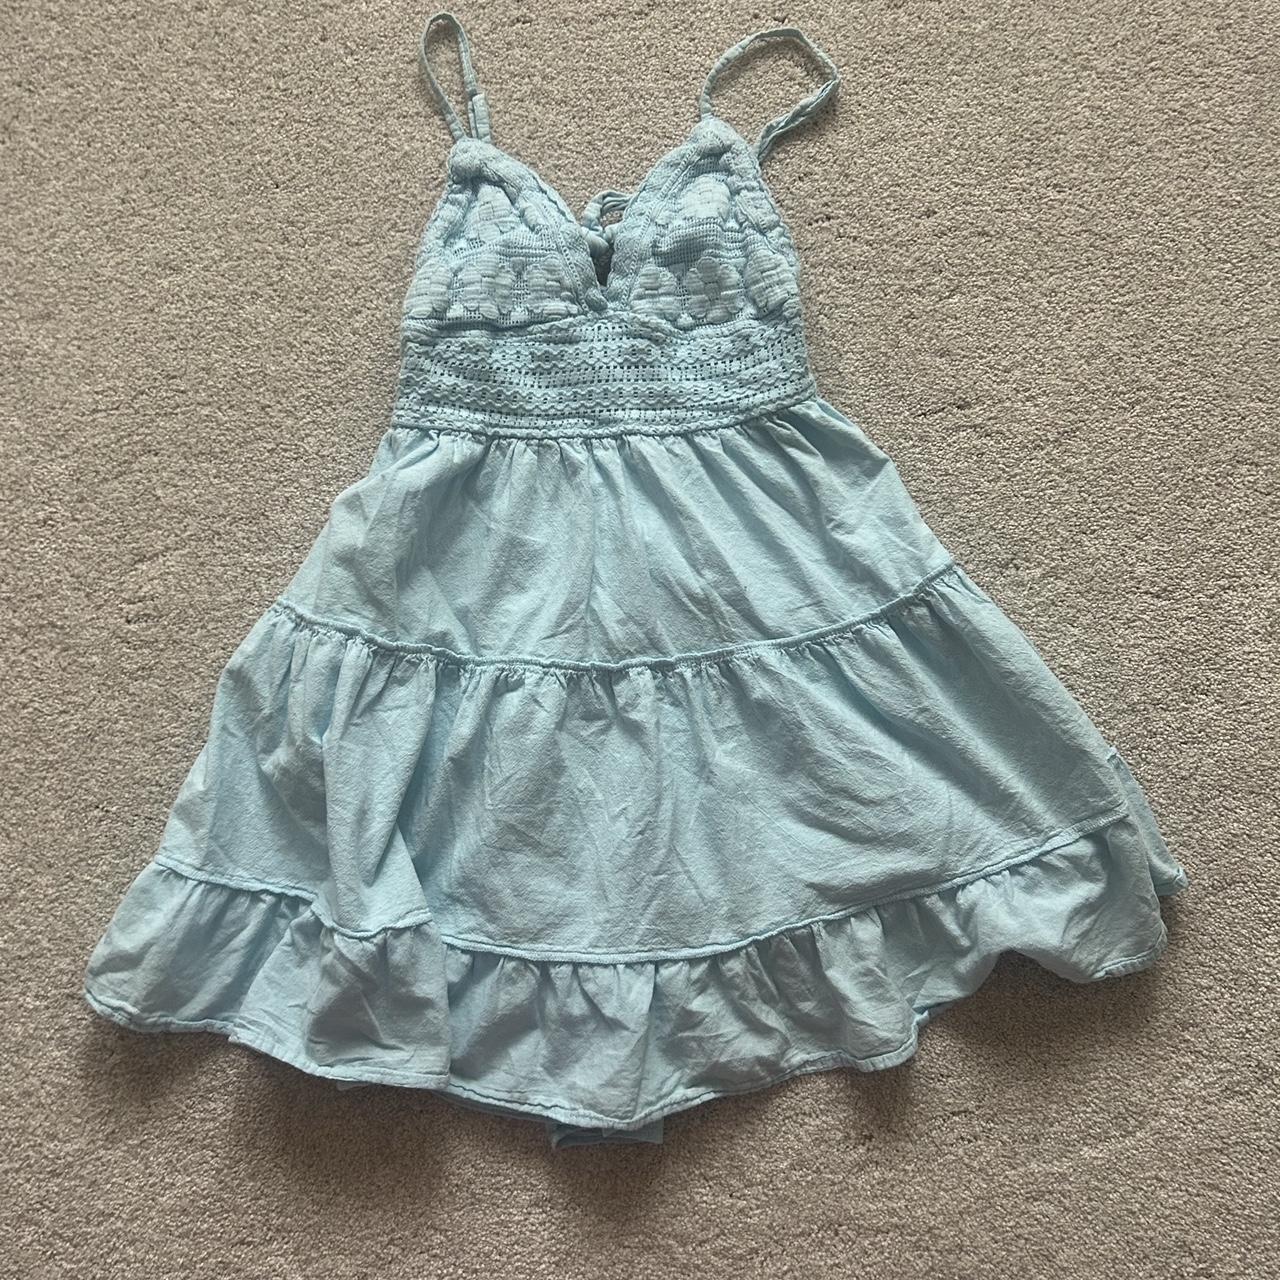 light blue sundress - Blanco by Nature - bought in... - Depop